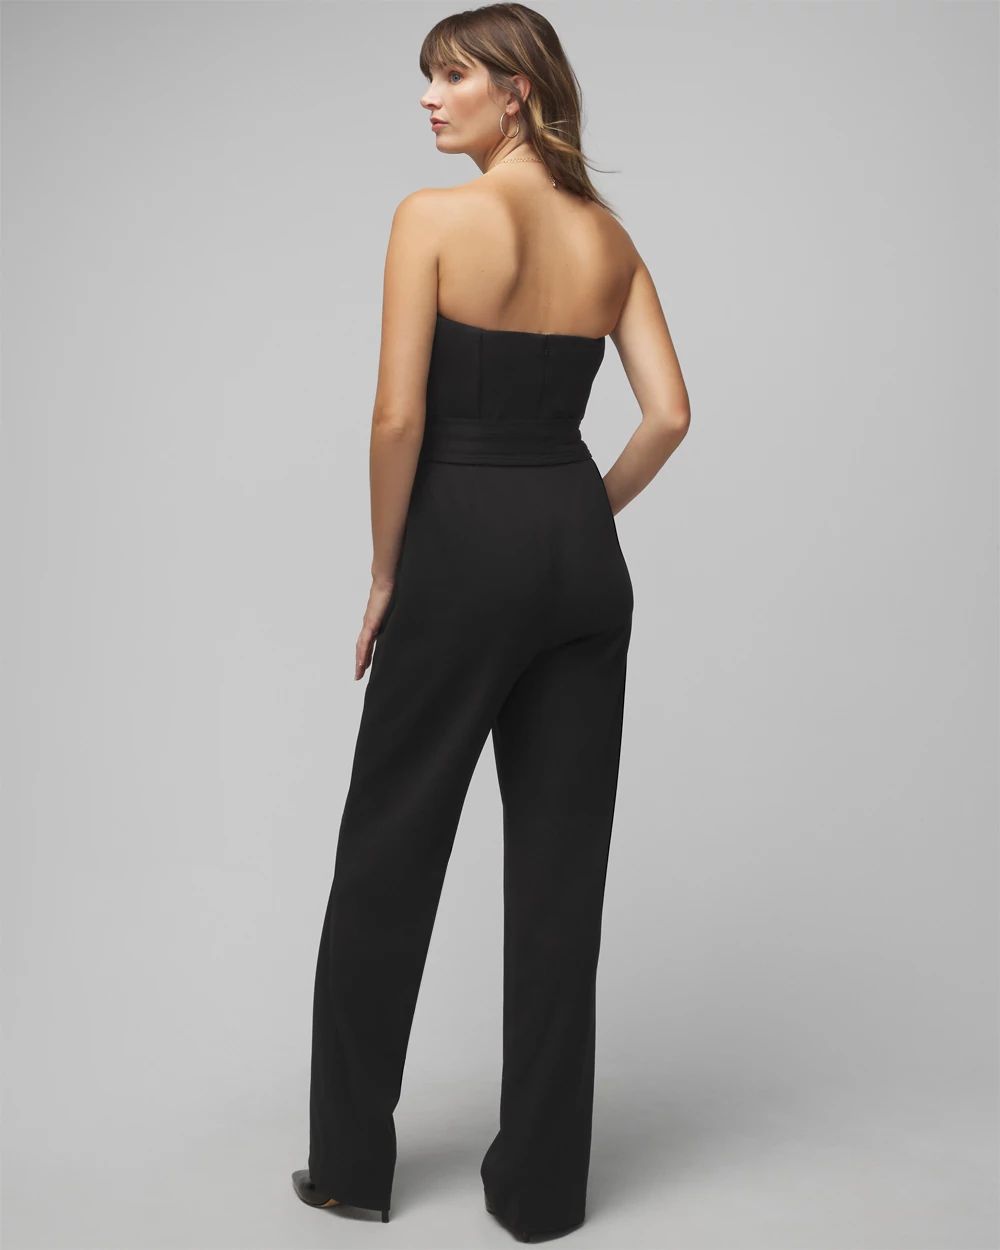 Petite Strapless Belted Jumpsuit click to view larger image.